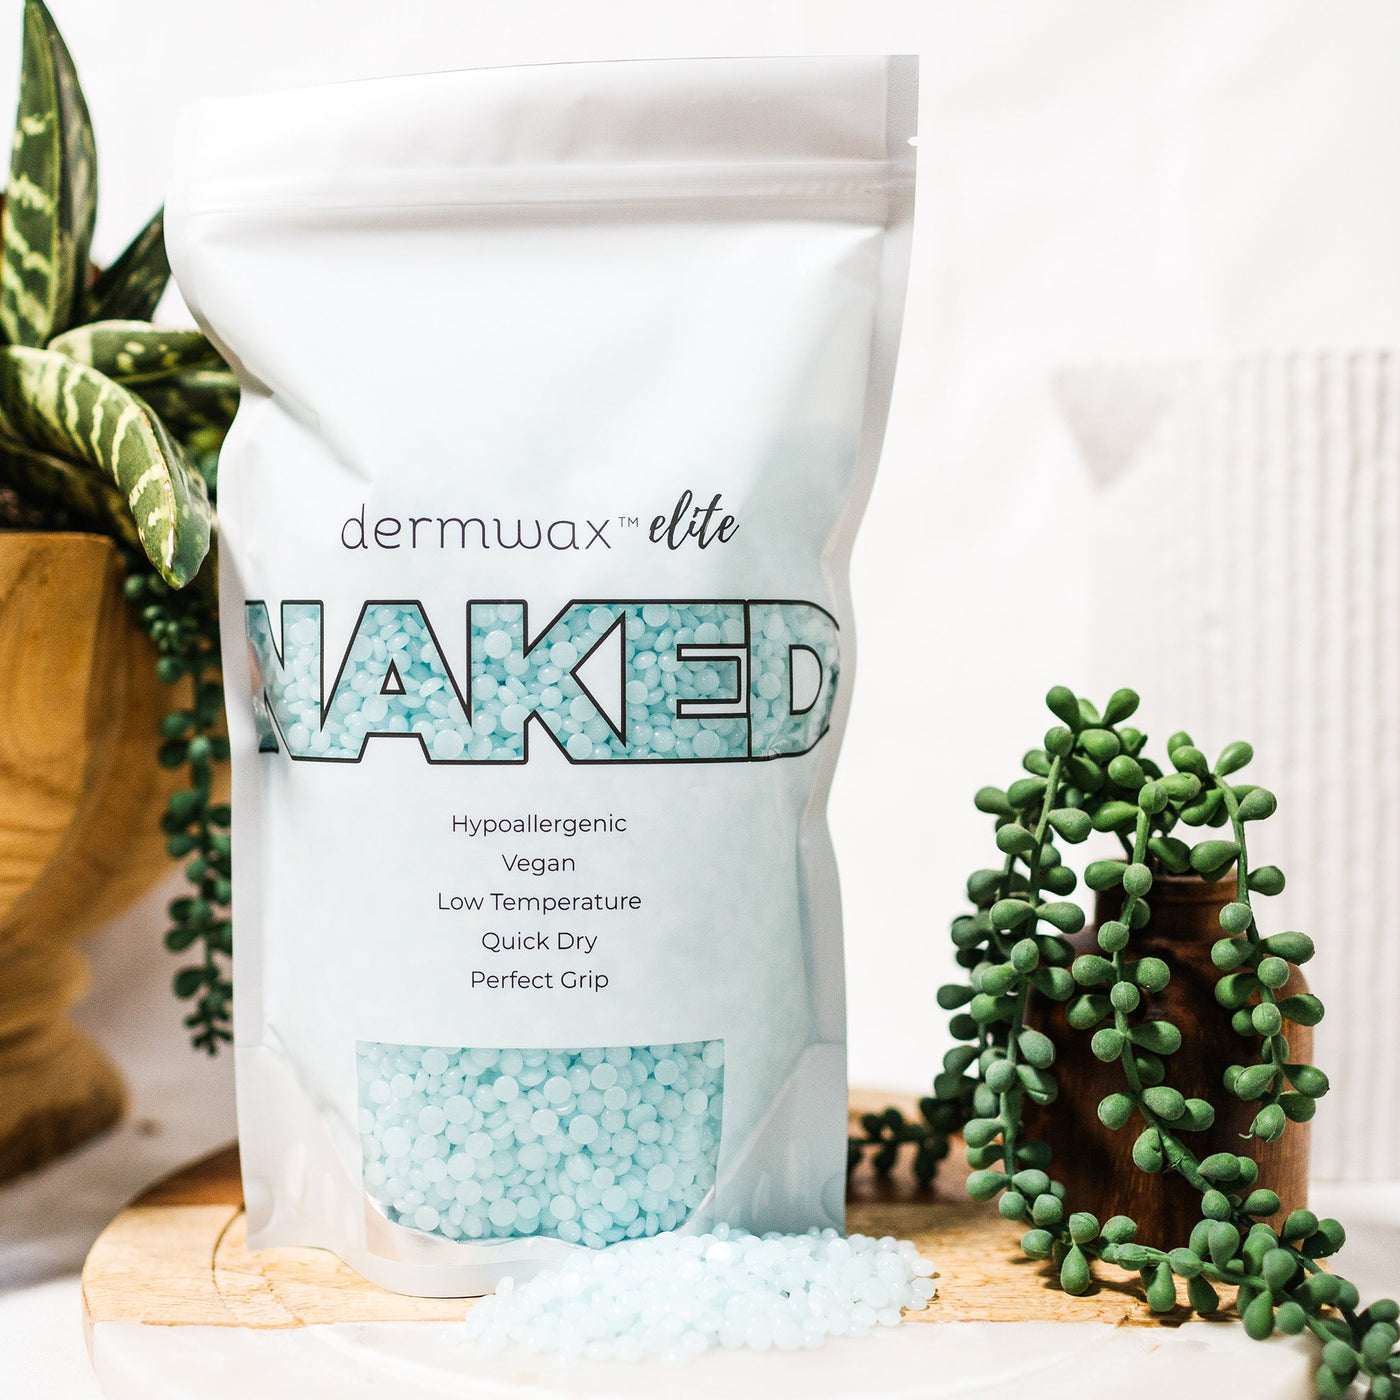 Dermwax Elite NAKED Sparkle Blue Wax Beads - In A Spa